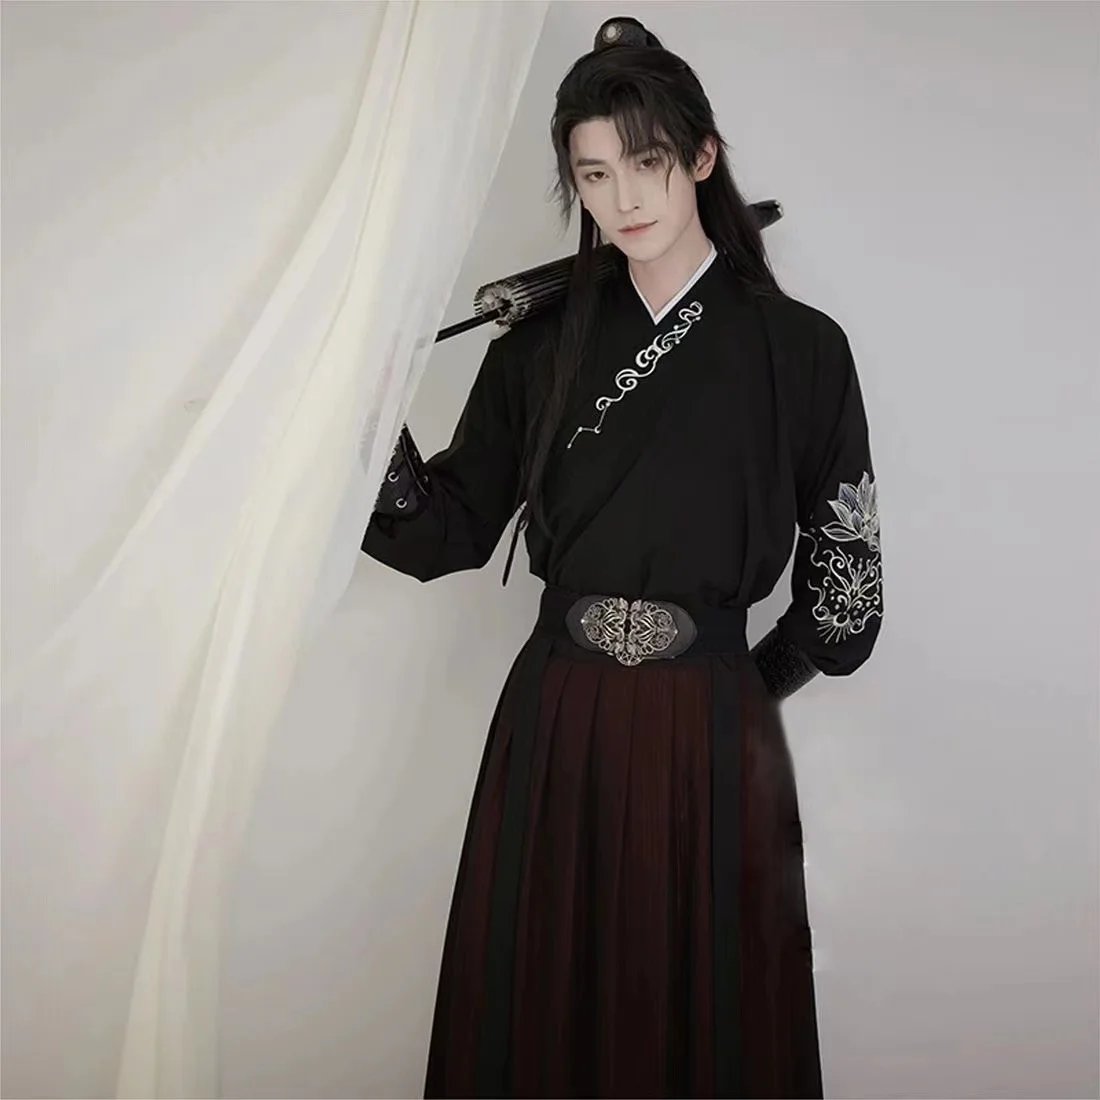 Chinese Style Hanfu Men Ancient Black Costume Hanfu Dress for Boys Girls Young Men Women Photography Cosplay Party Show Clothing newborn photography props crochet bee shape costume prop outfits newborn photography clothing set baby photo props black and